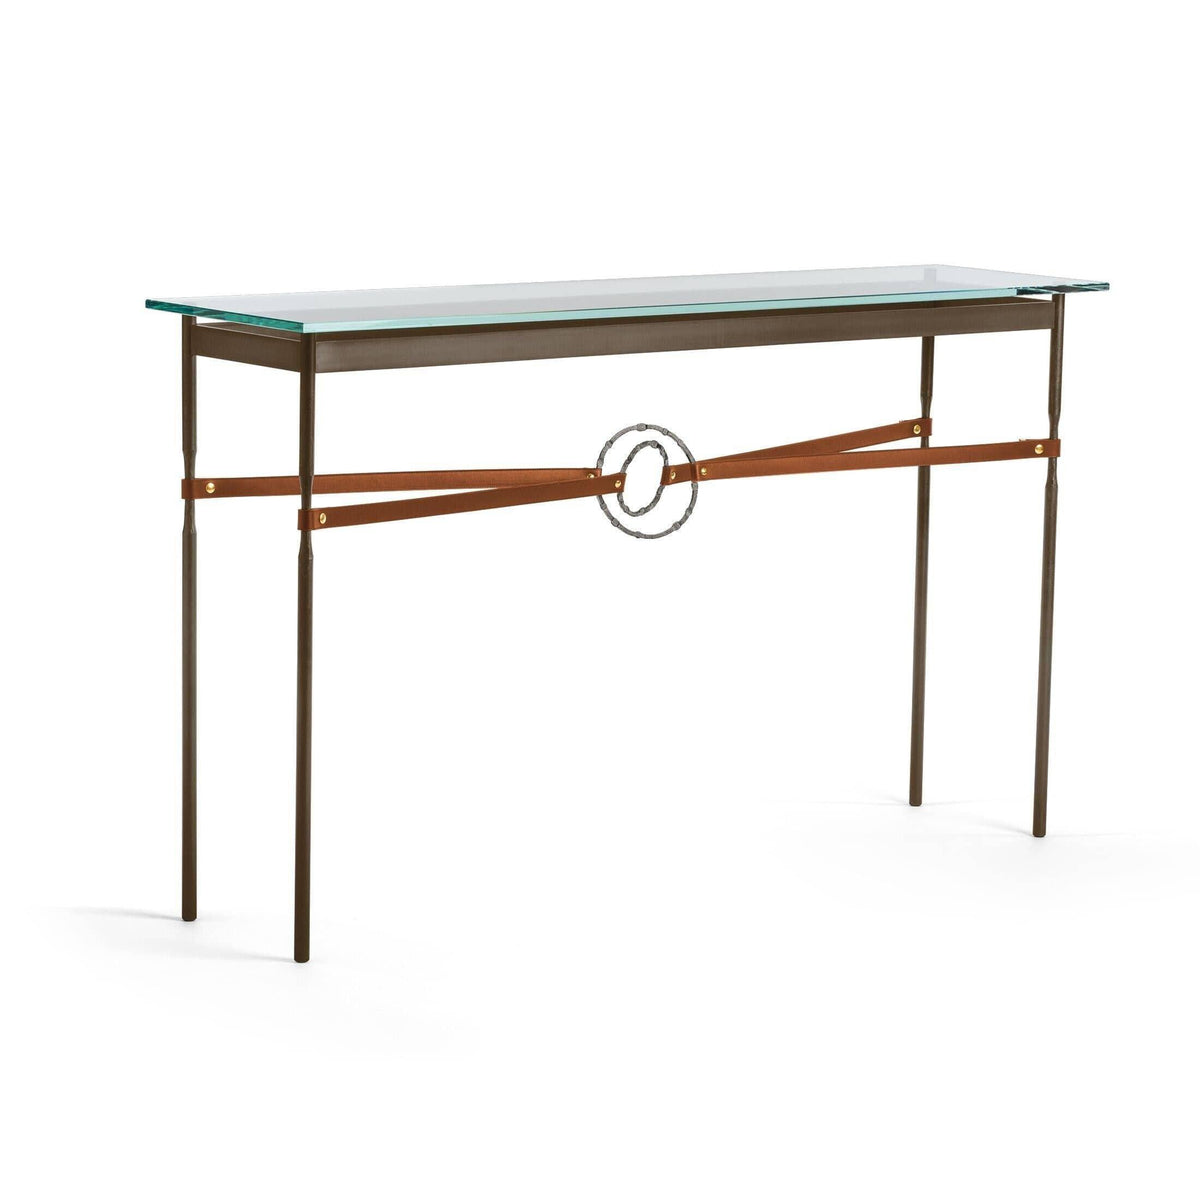 Hubbardton Forge - Equus Chestnut Leather Console Table - 750118-05-20-LC-VA0714 | Montreal Lighting & Hardware